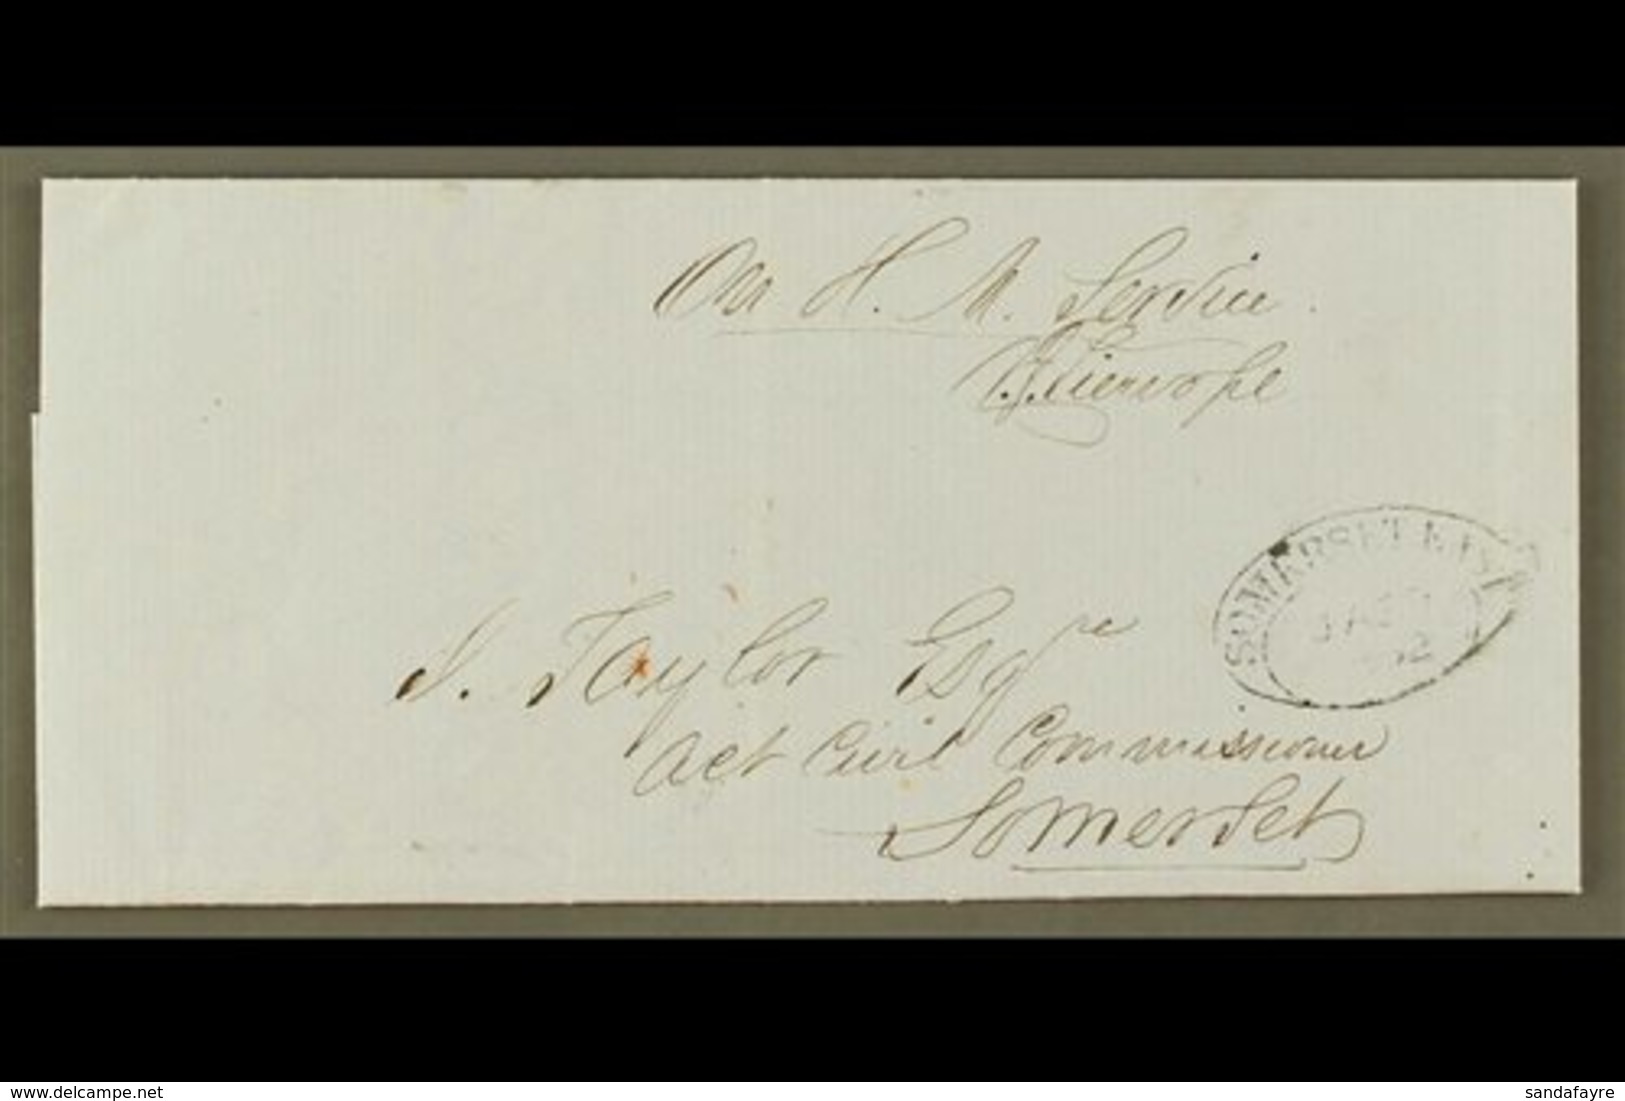 \Y CAPE\Y 1862 (29 Jan) Cover From Pearston To Somerset East, With Dated Oval Handstamp In Red On Reverse, Oval Arrival  - Unclassified